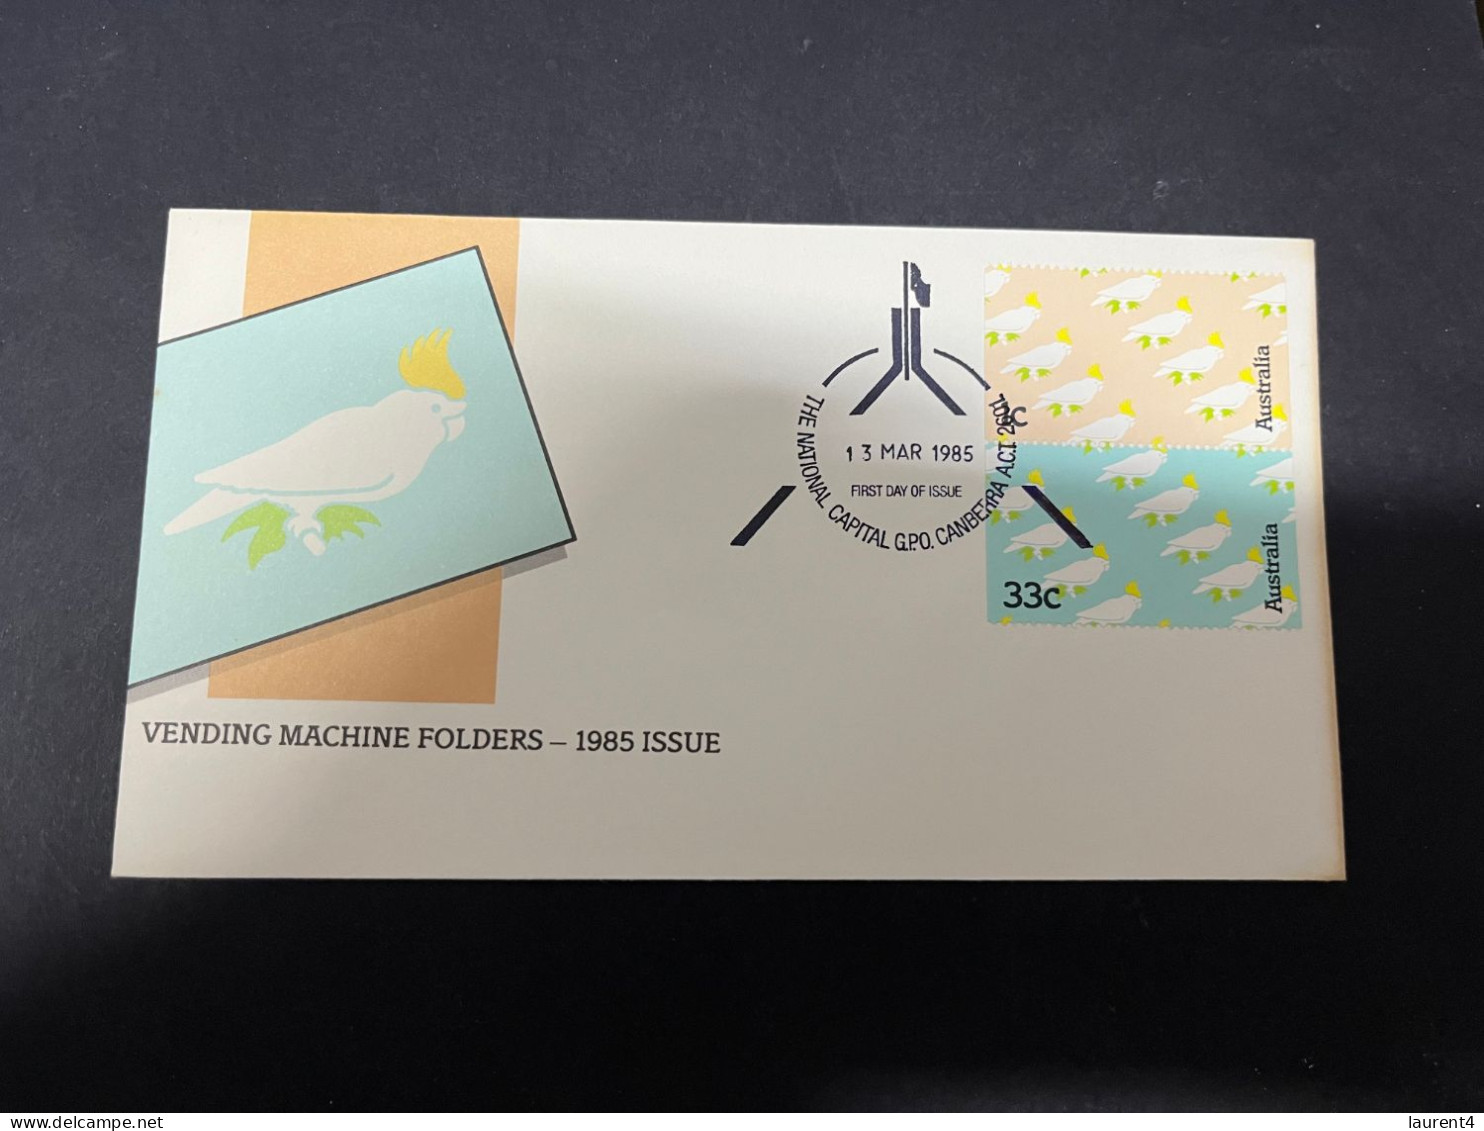 26-3-2024 (4 Y 9) Australia (2 With With Different Postmark) FDC - Vending Machine Folders 1985 Issue - FDC